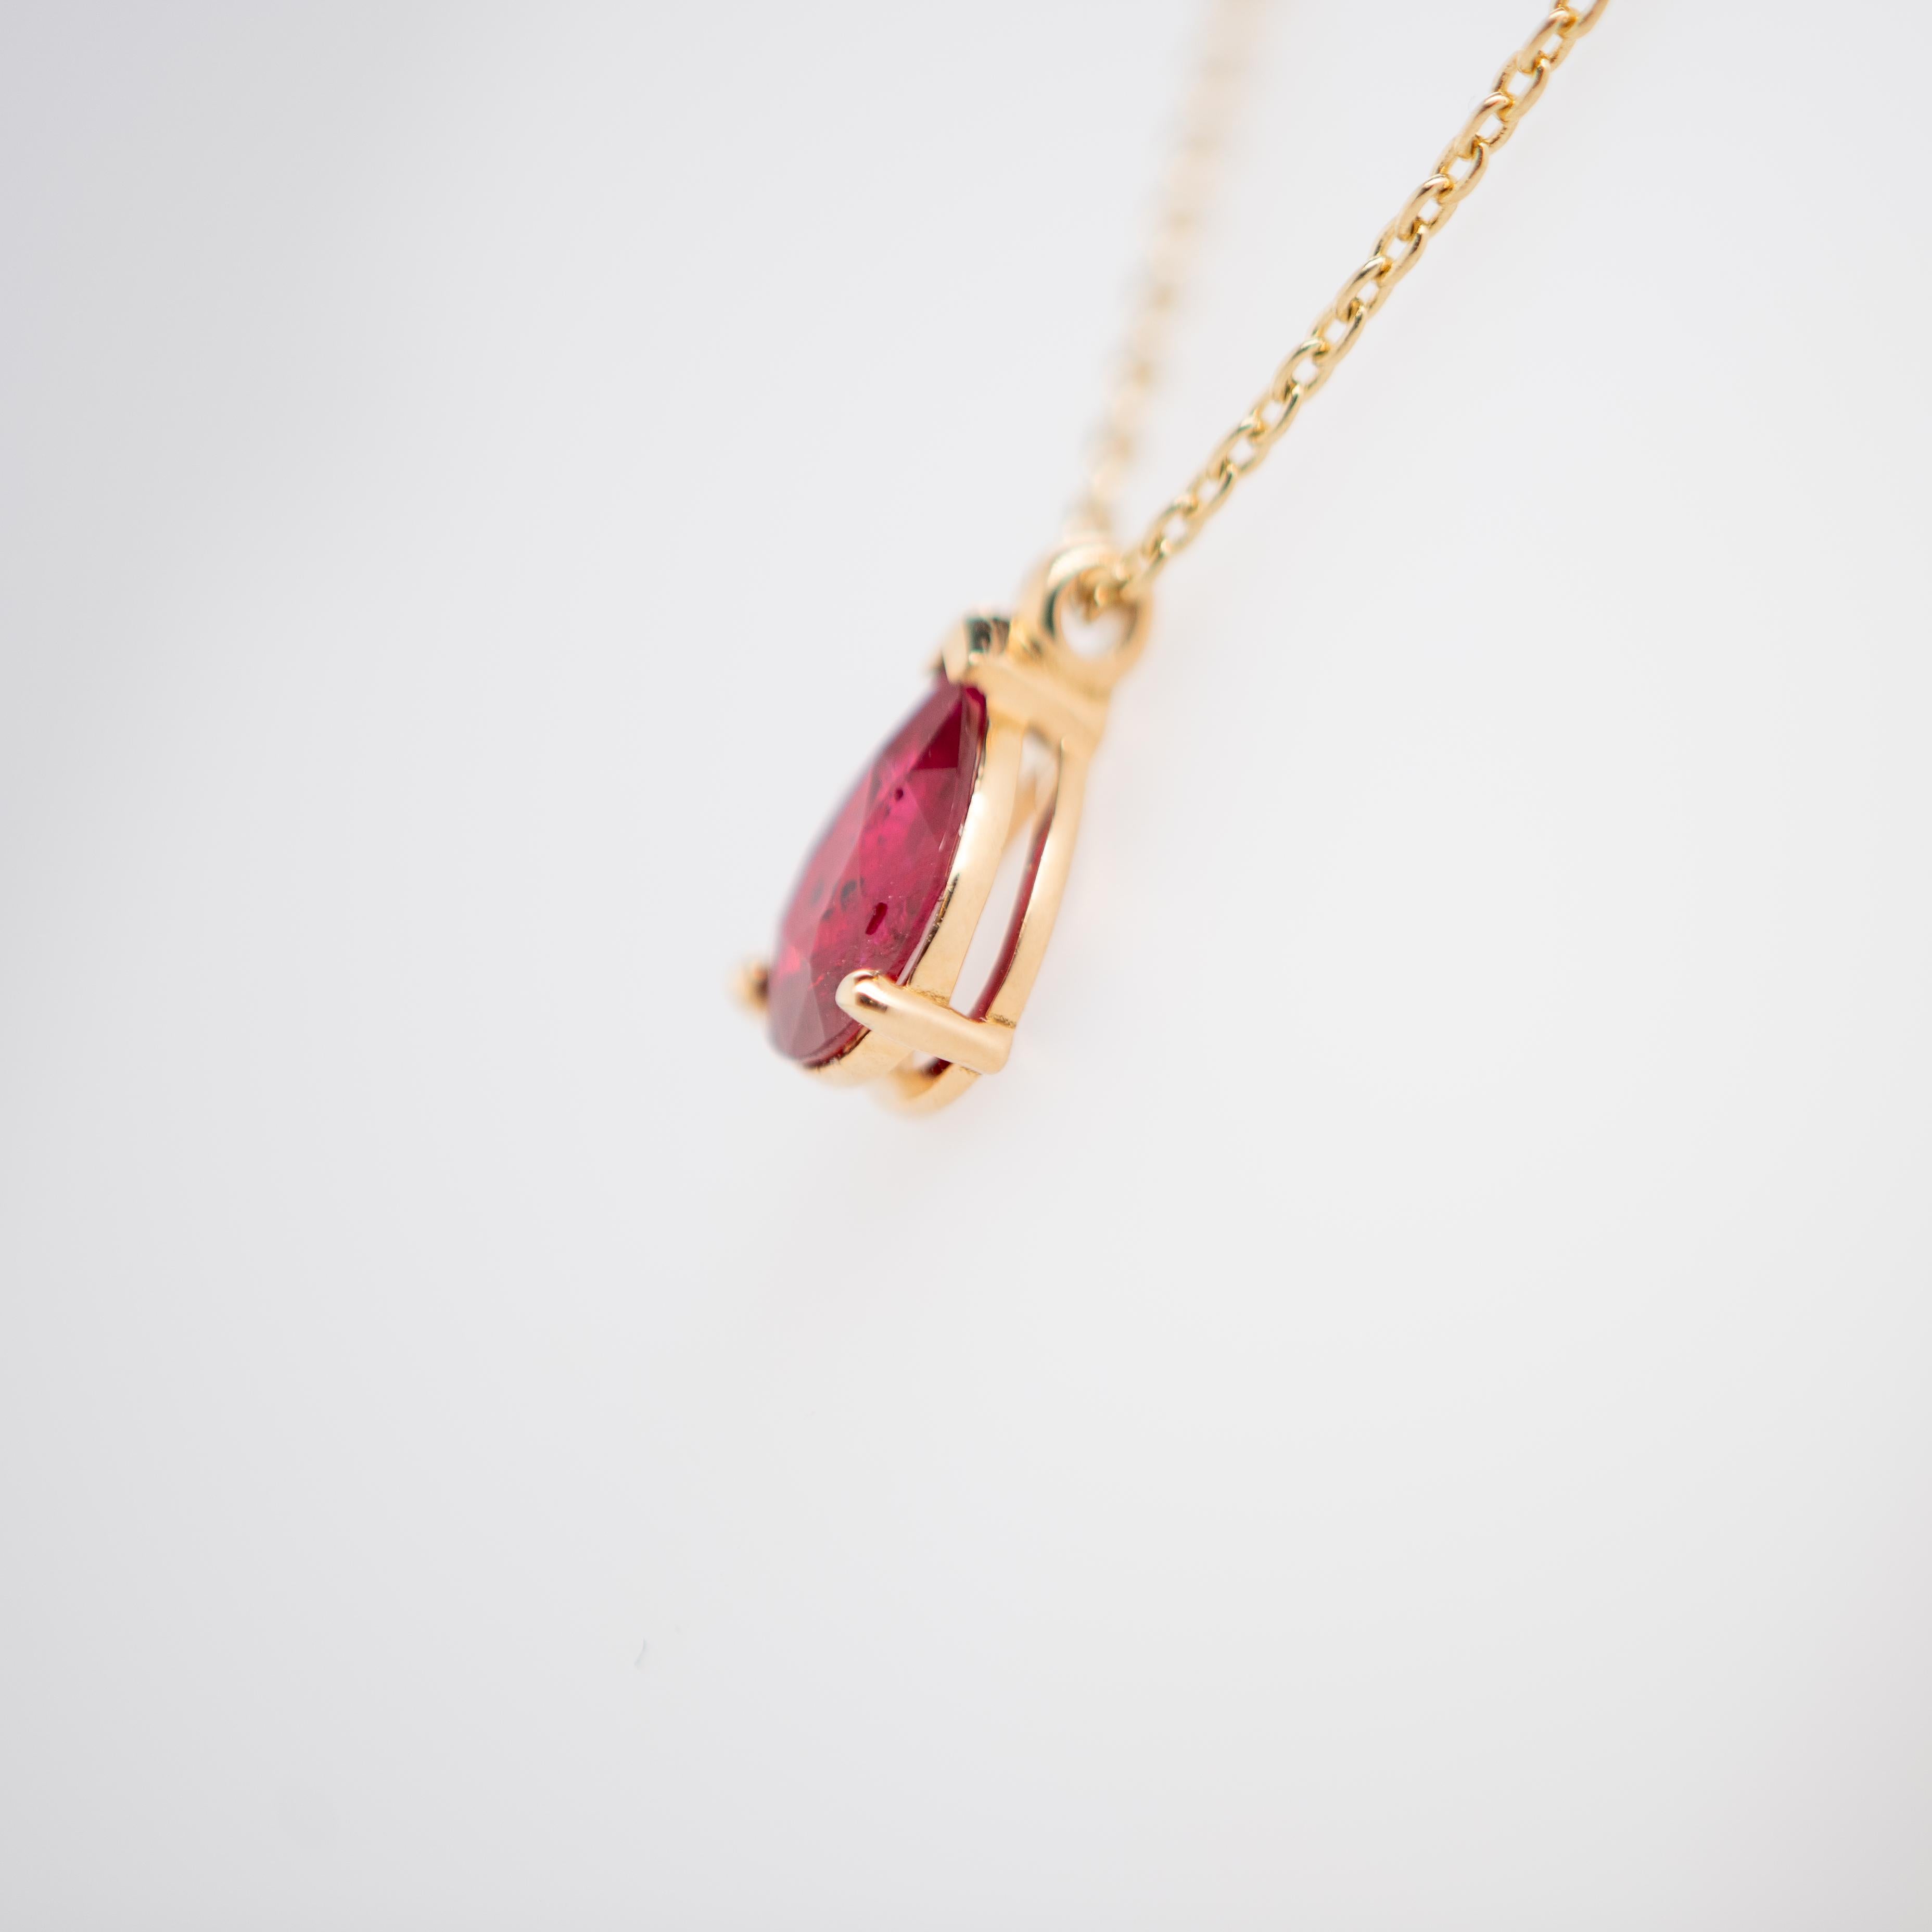 Pear Cut Ruby Certified Pigeon's Blood Pendant 18 Carat Yellow Gold